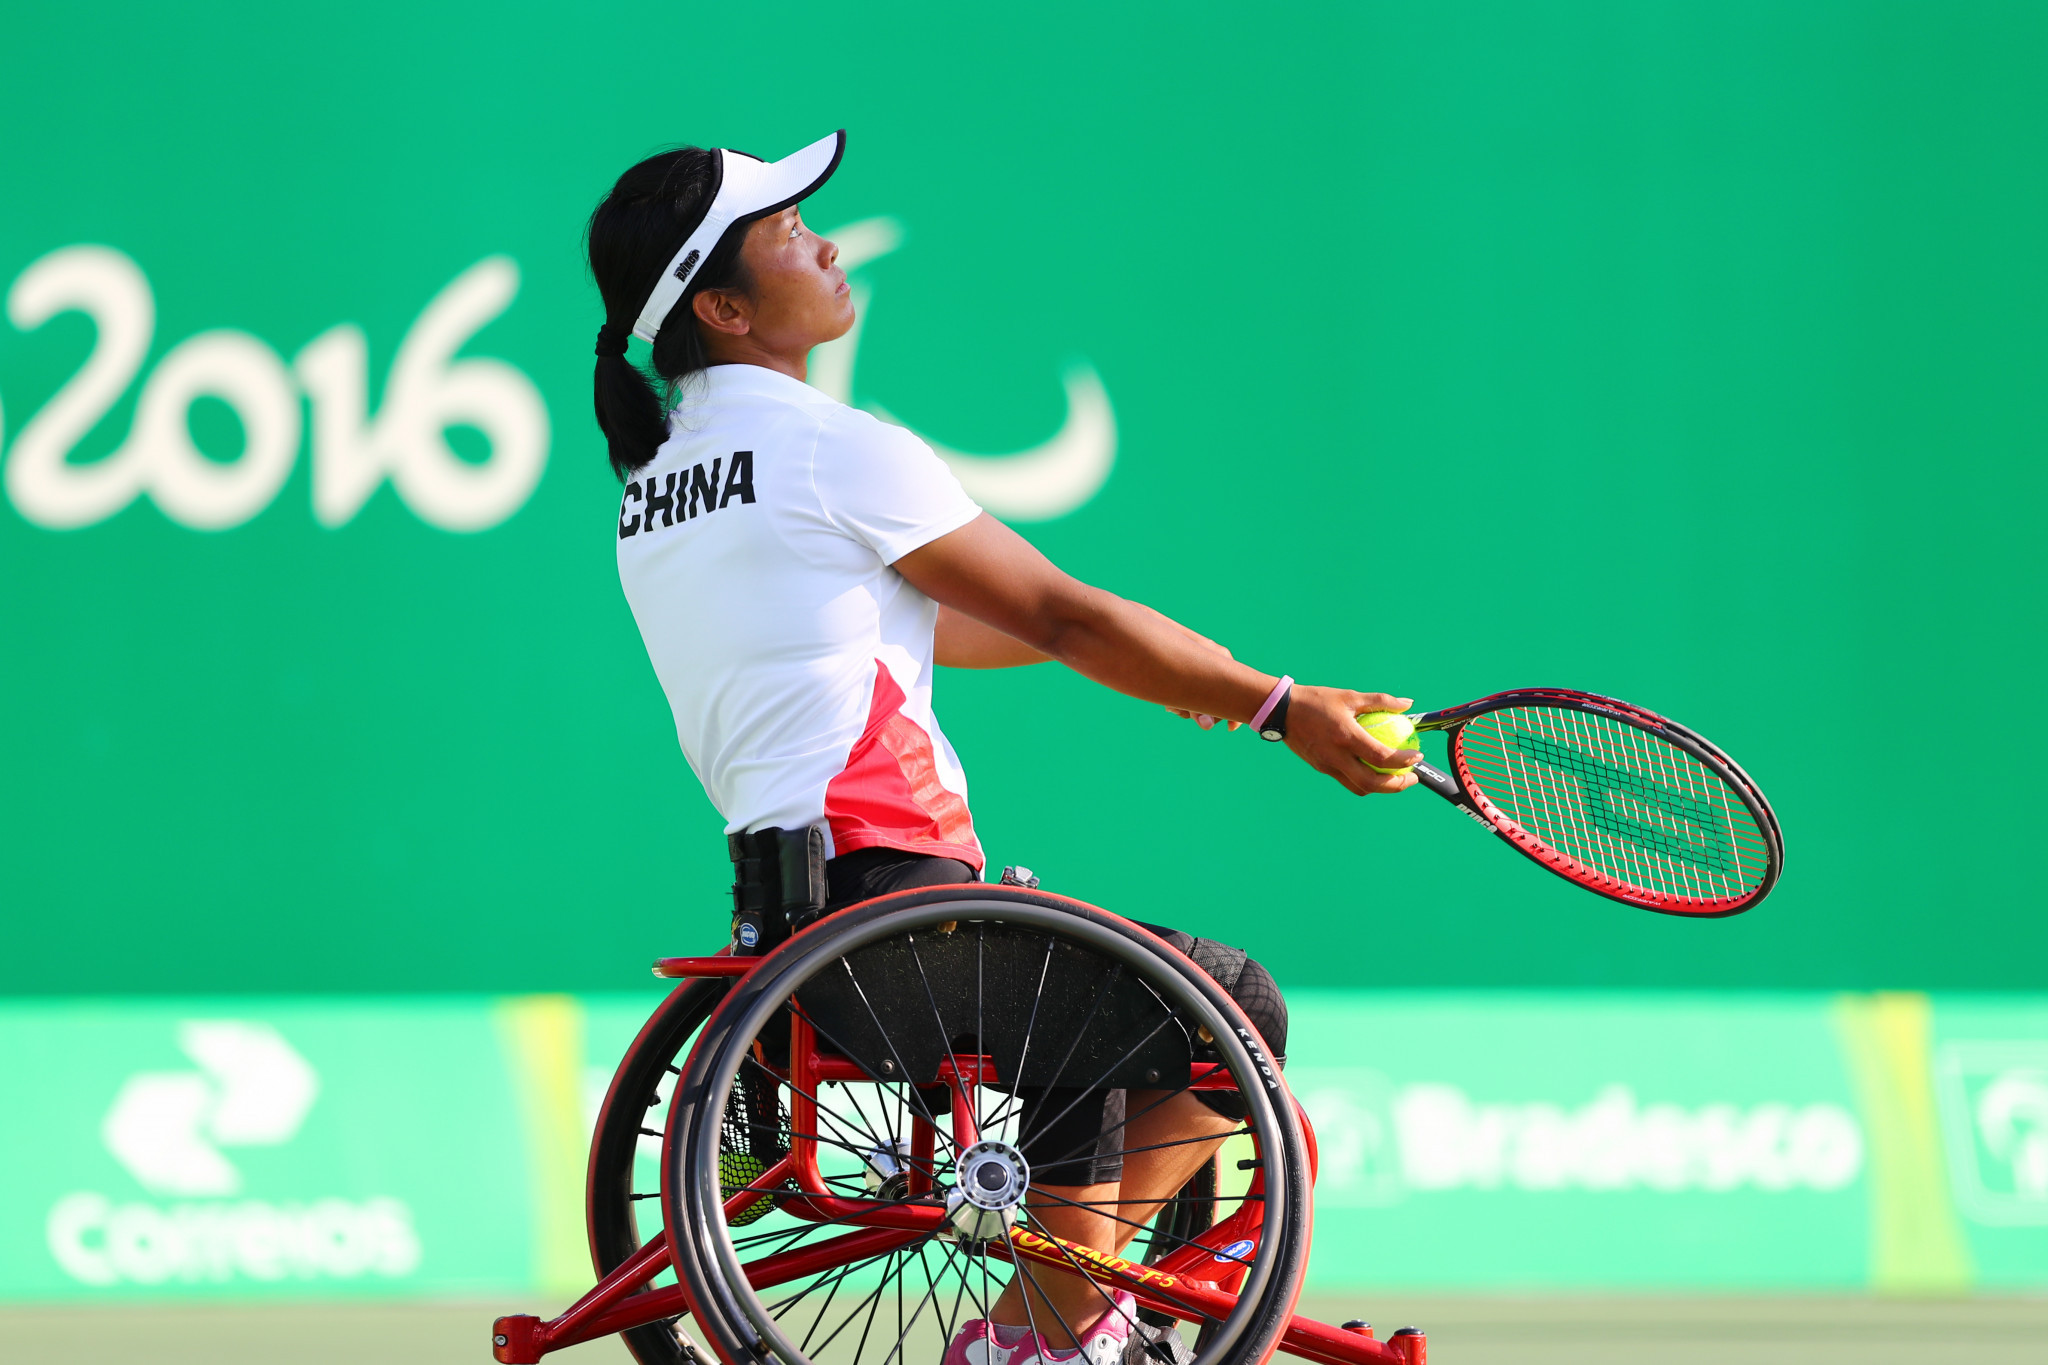 Zhenzhen Zhu appeared at the Rio 2016 Paralympic Games ©Getty Images